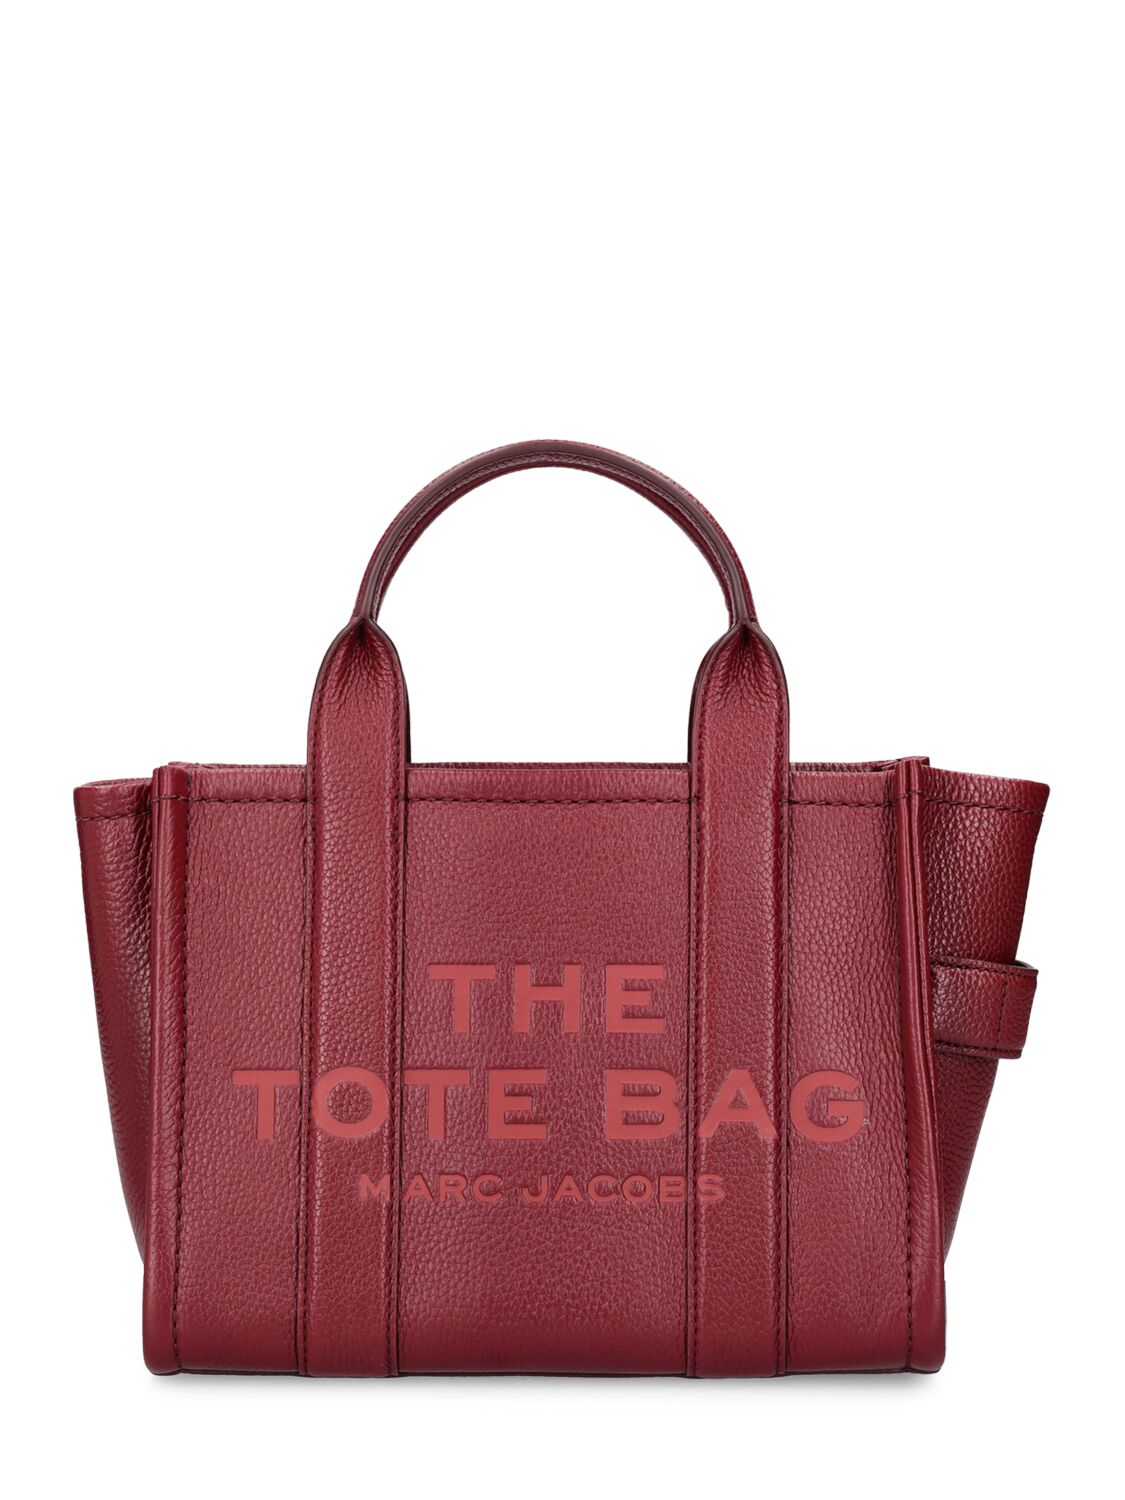 Image of The Small Tote Leather Bag